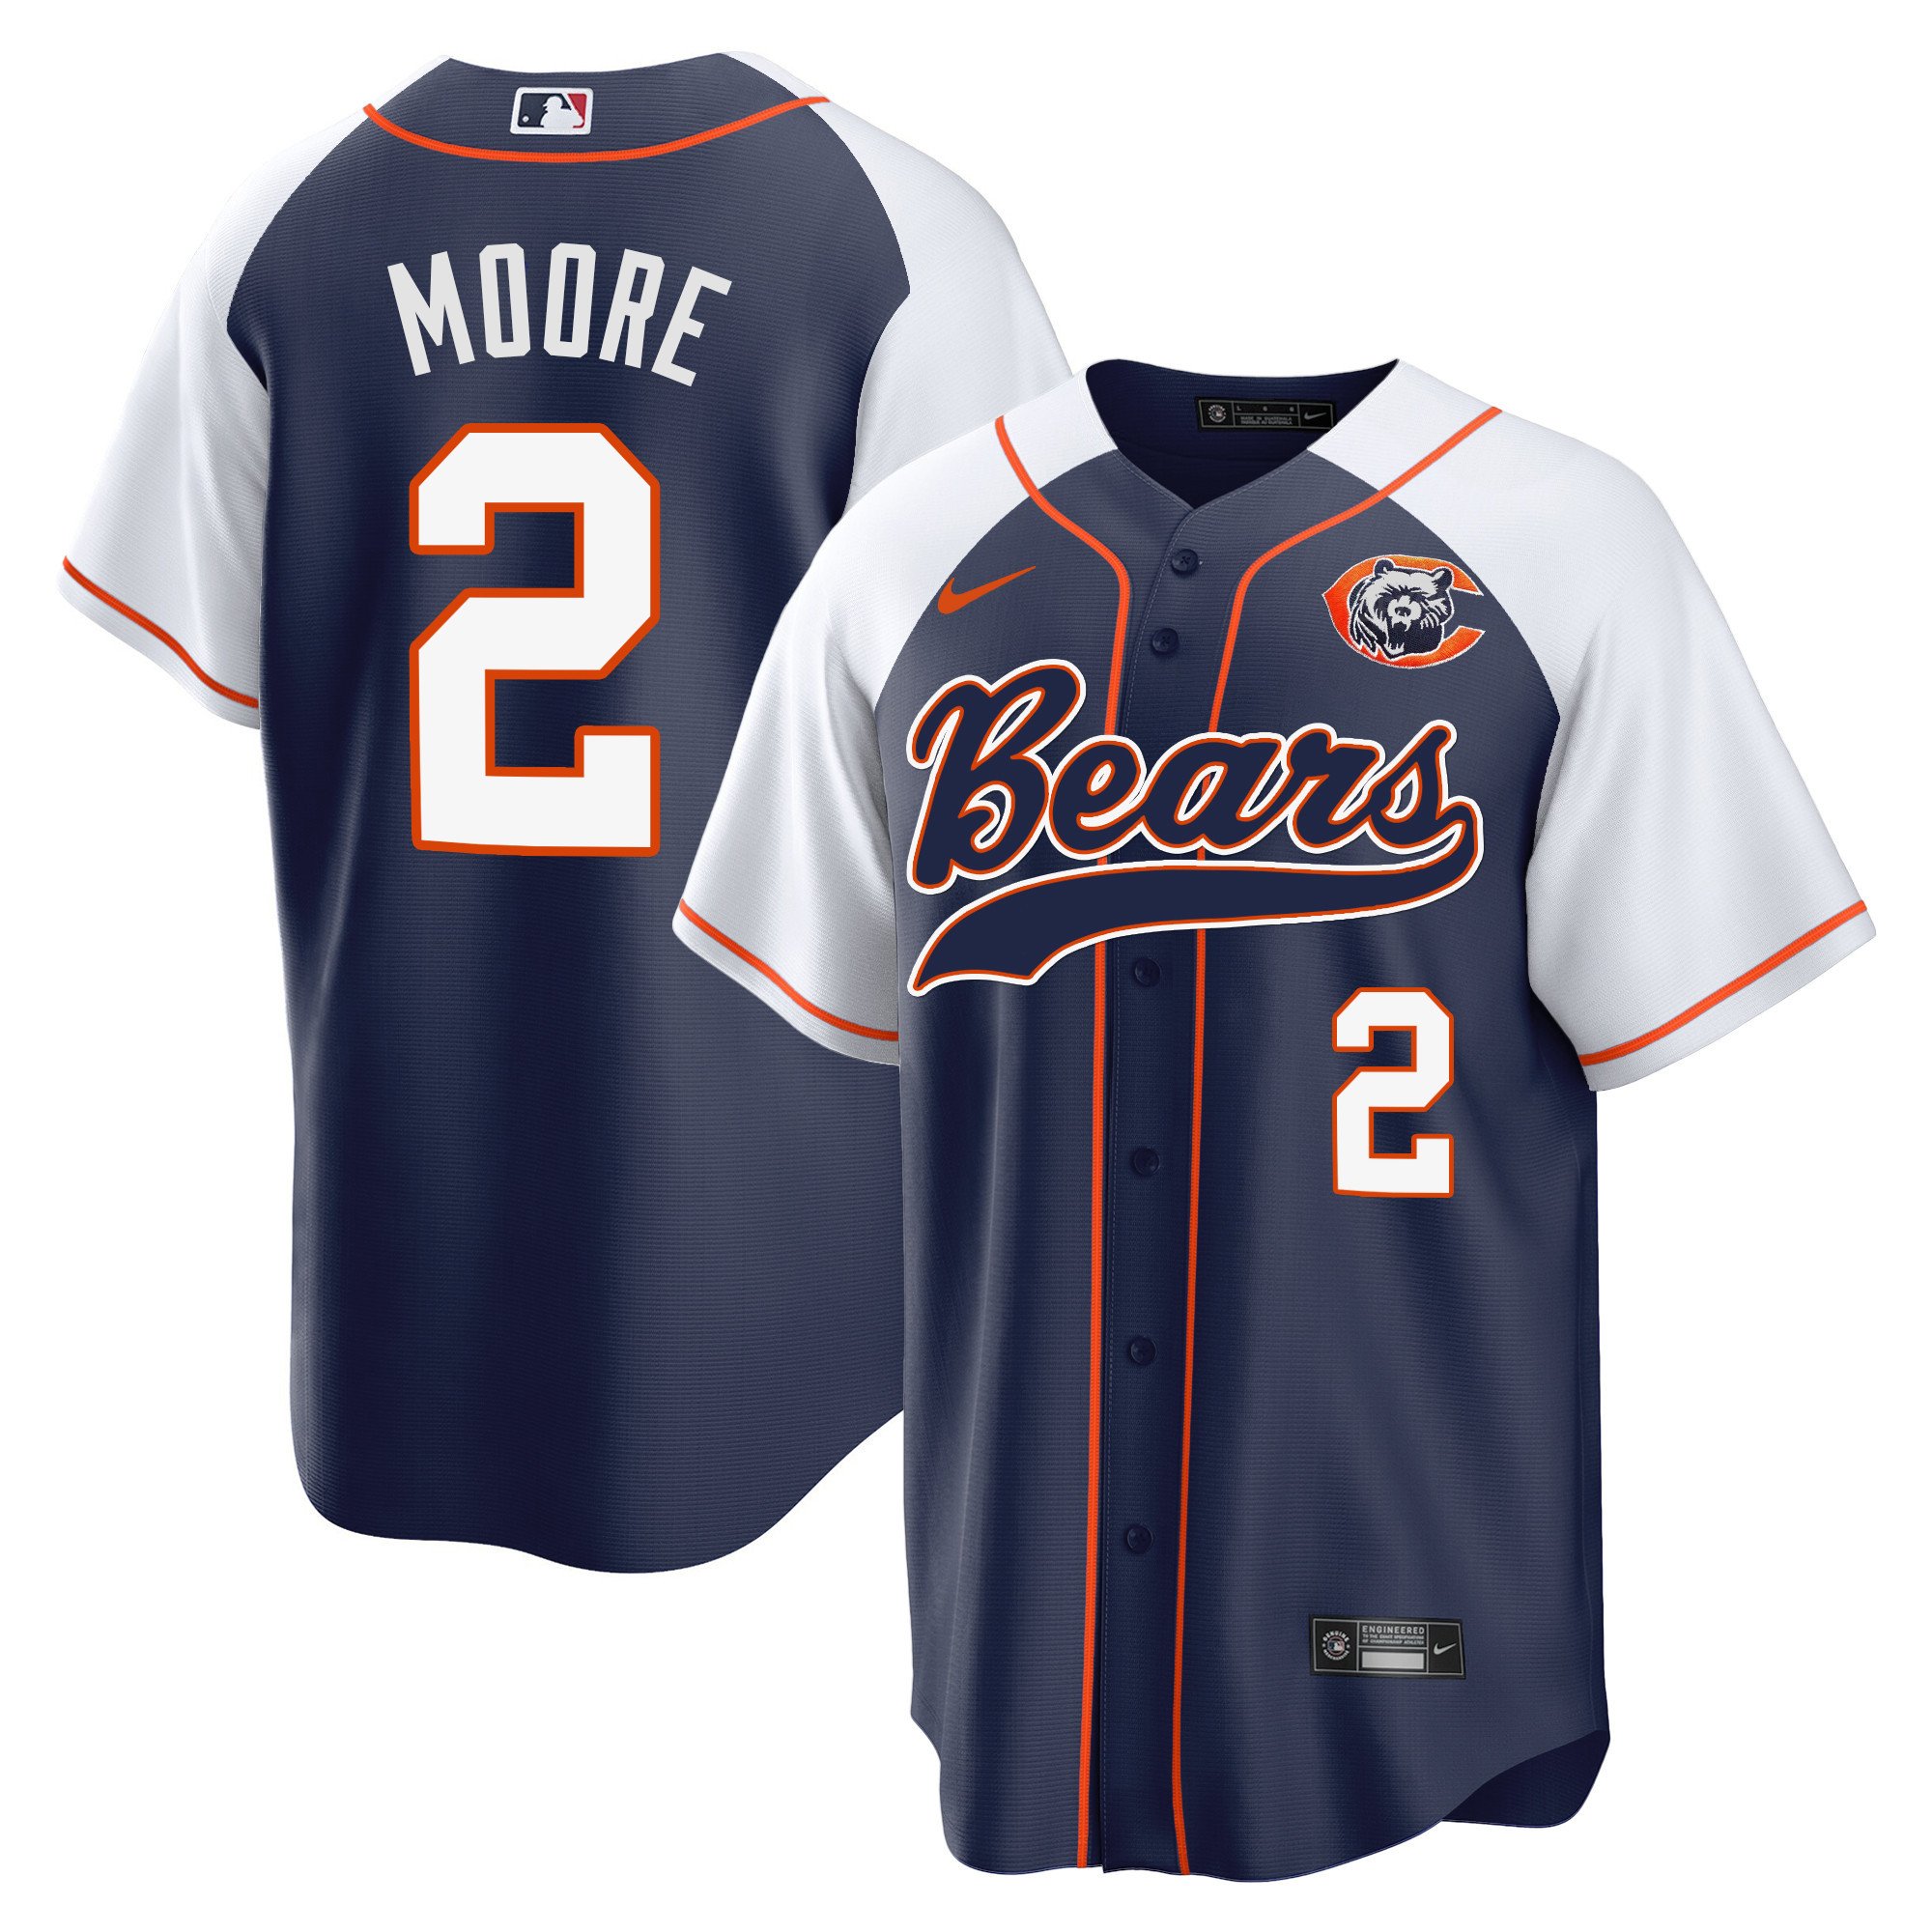 Men's Bears Throwback Baseball Jersey - All Stitched - Nebgift